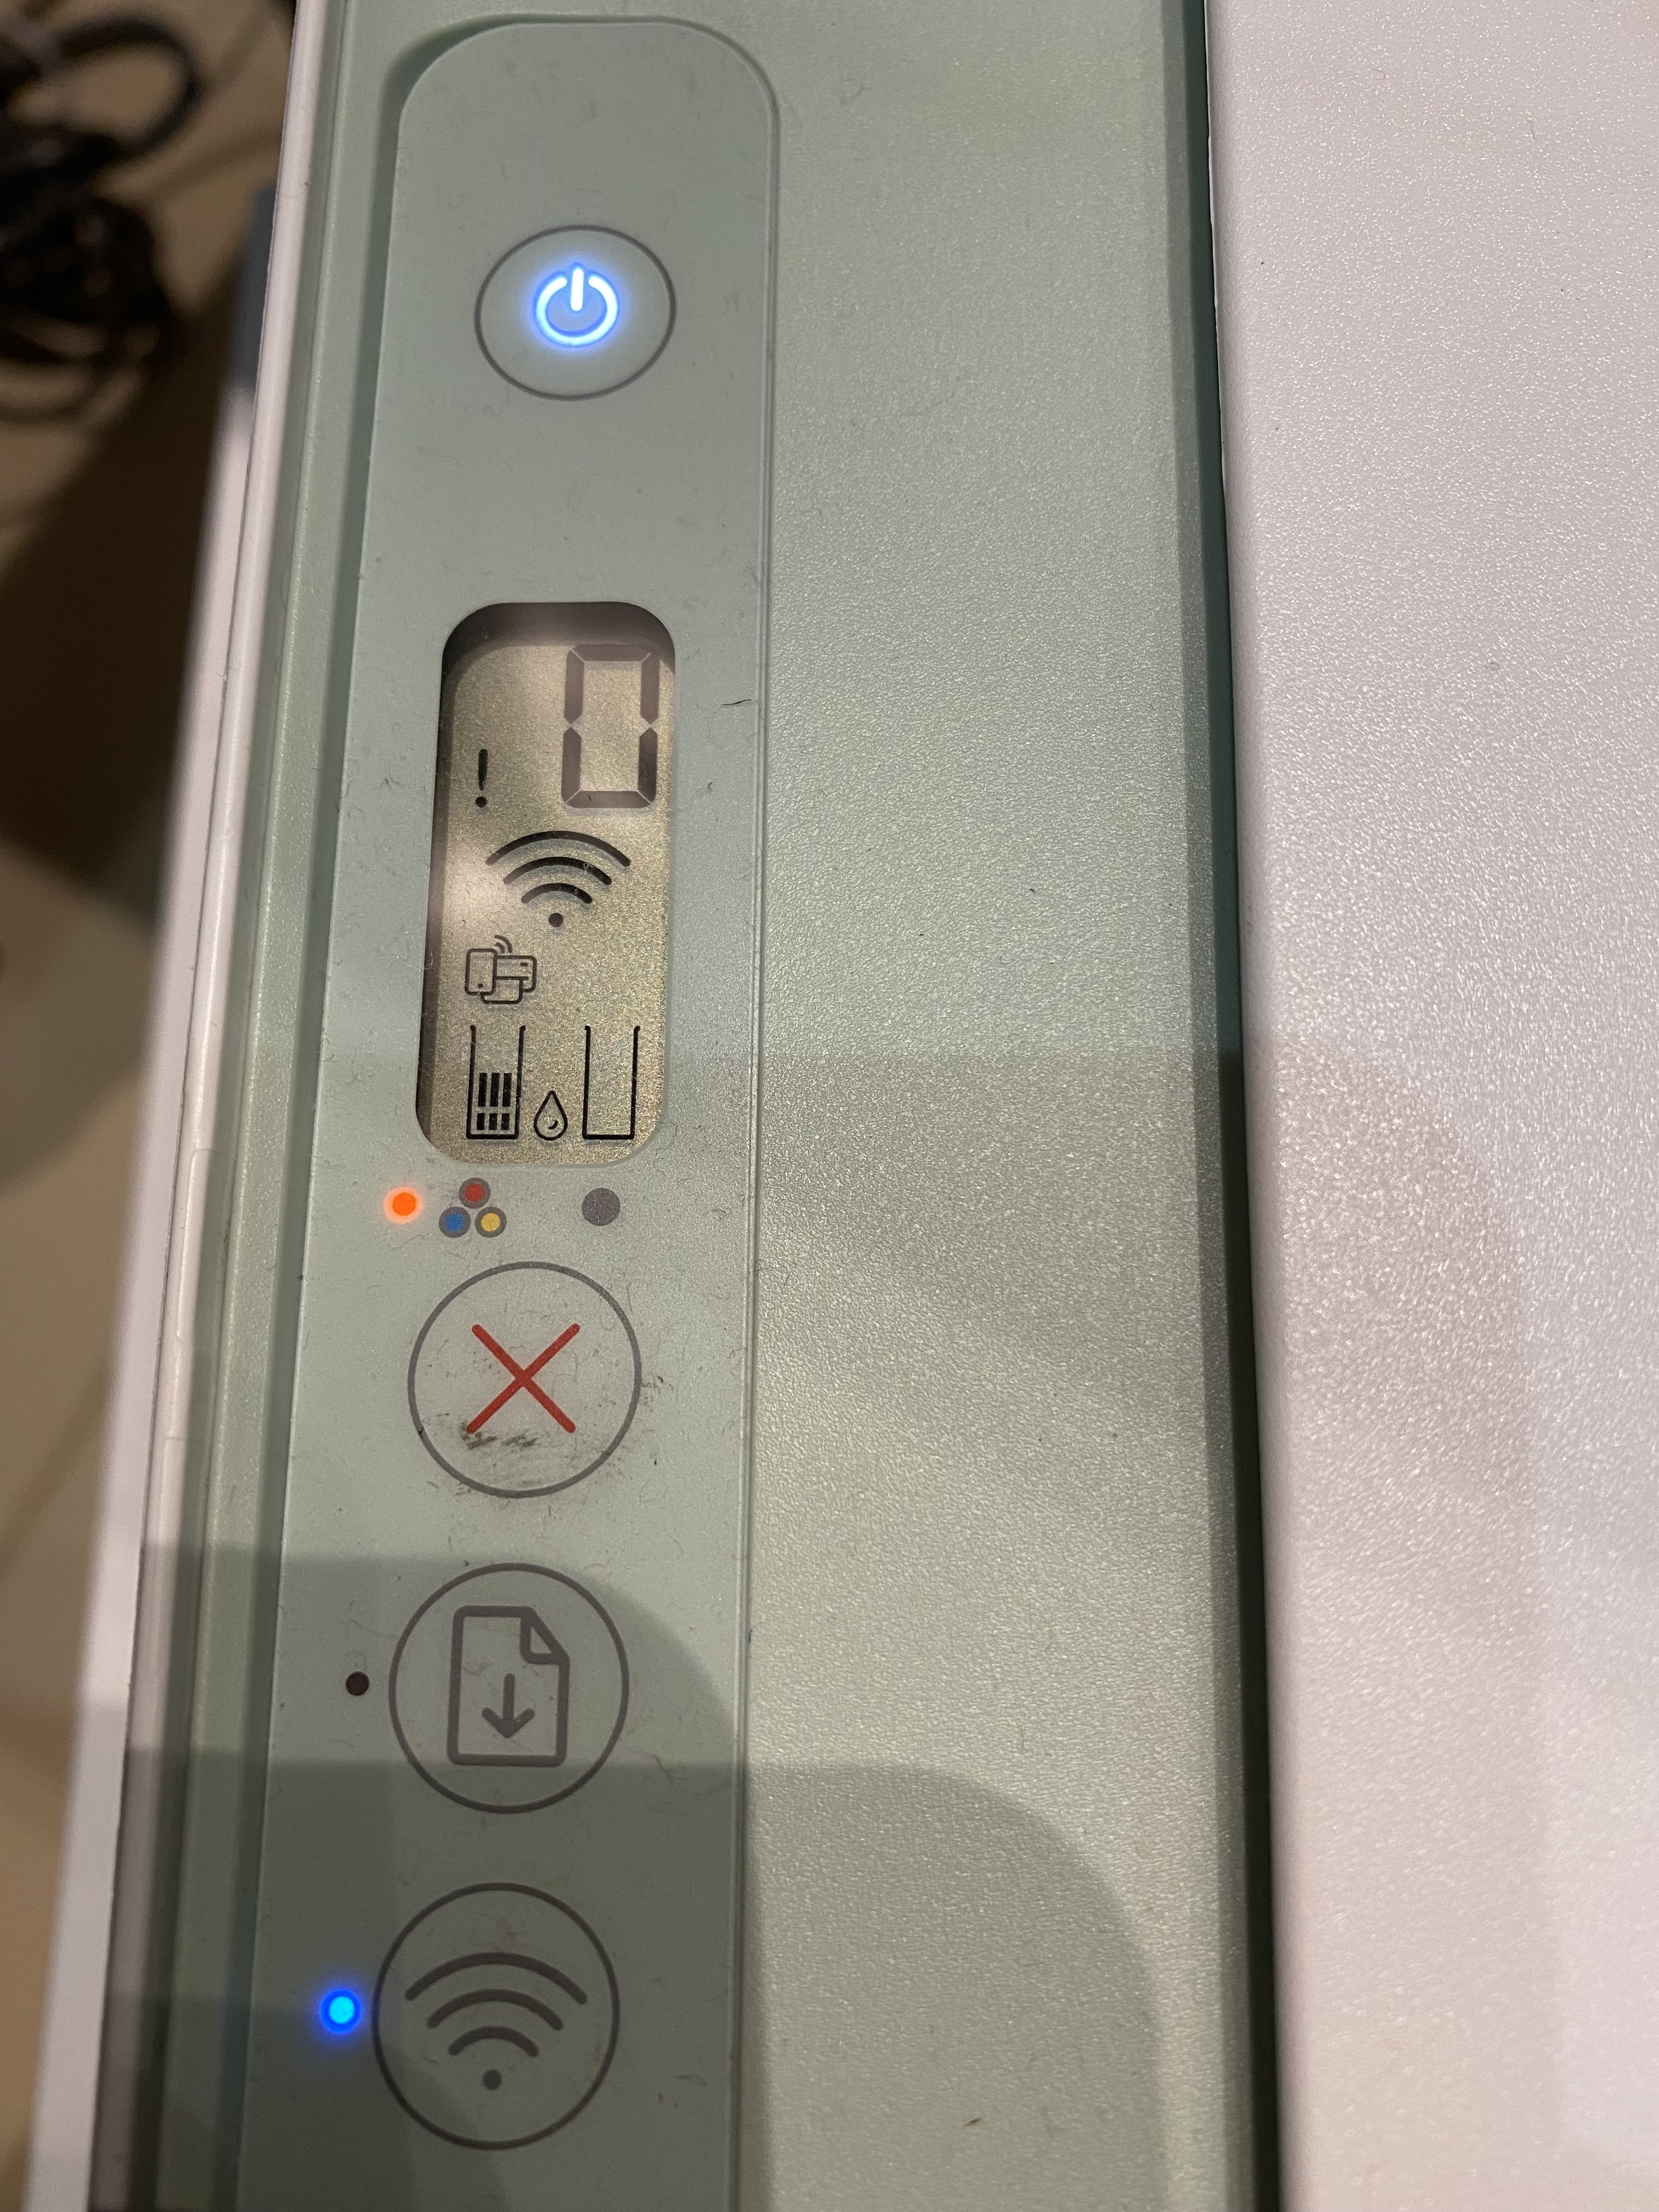 HP Deskjet 2700 Connect to Wifi - 3 Ways to Do This